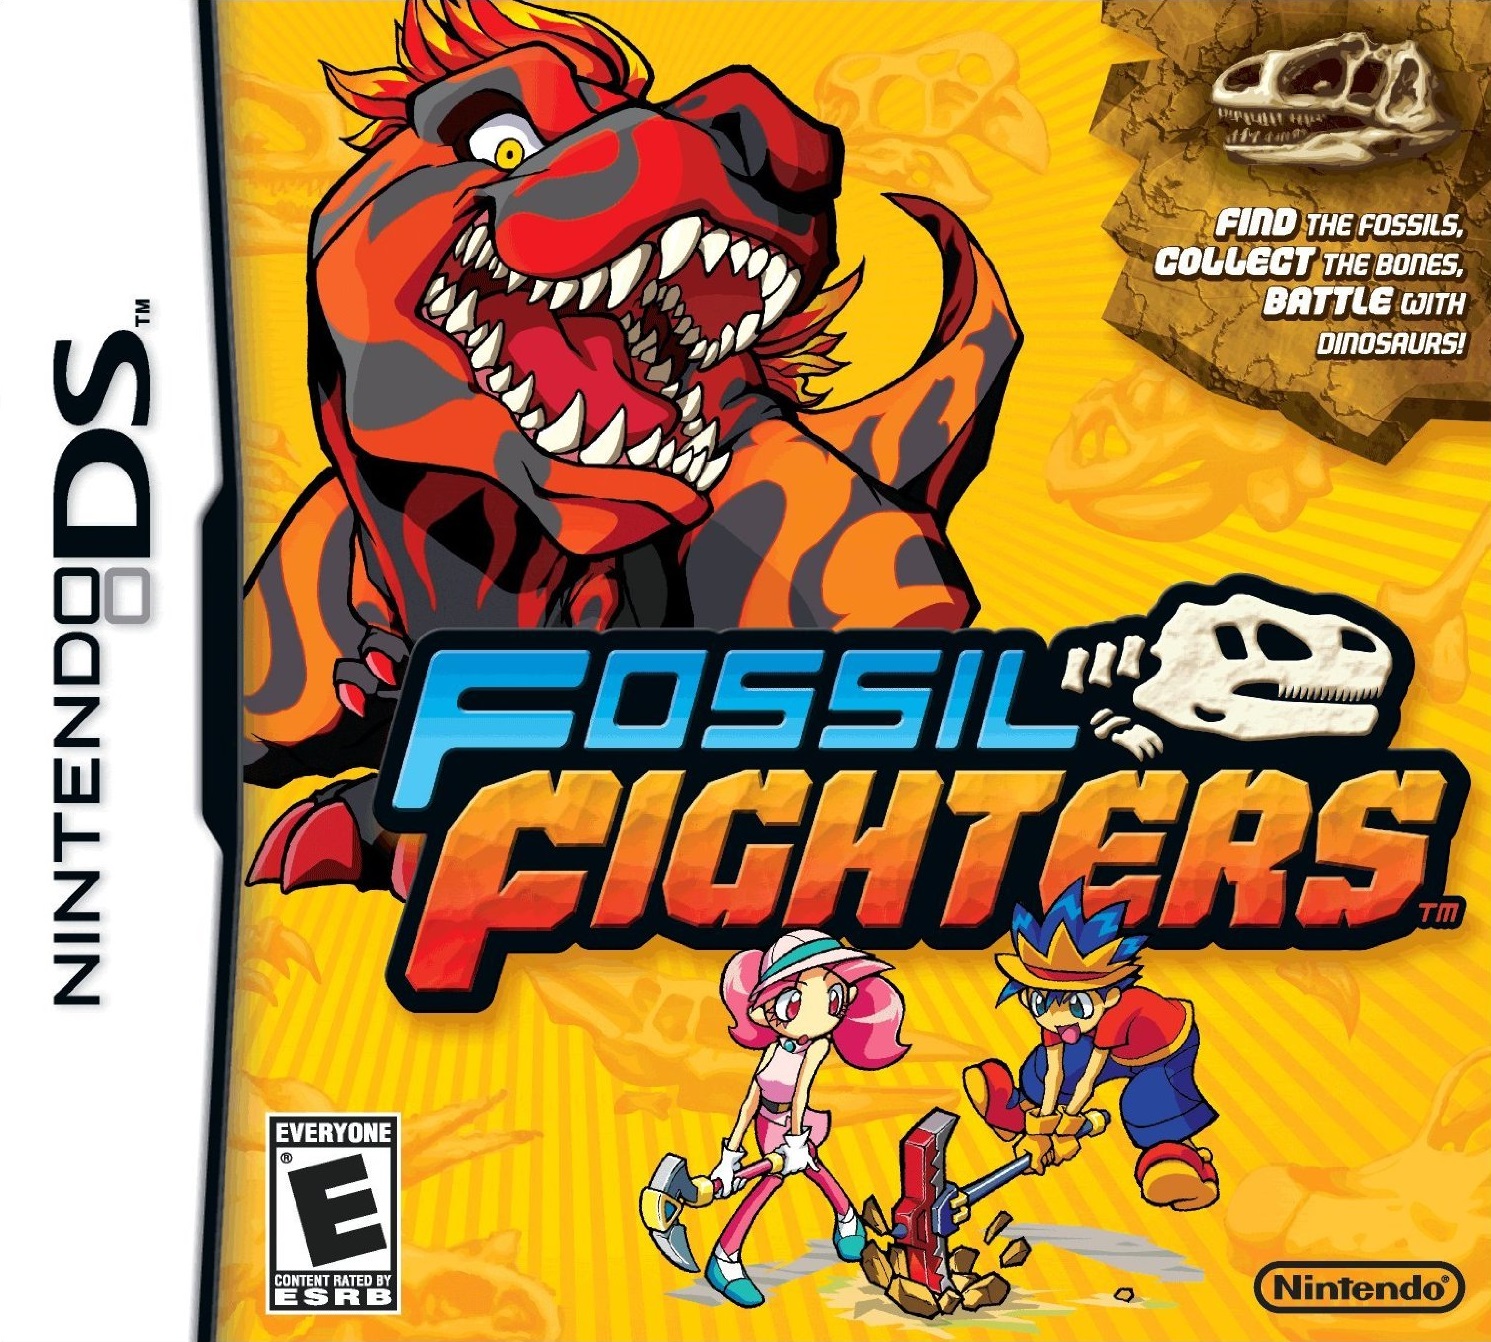 the Nintendo DS box art for Fossil Fighters. it features a red and black t-rex baring its teeth and two children digging with pickaxes. the background is yellow with faint lines drawing attention to the t-rex, and there are also faint images of different head fossils from the game. the logo also includes a small dinosaur skull